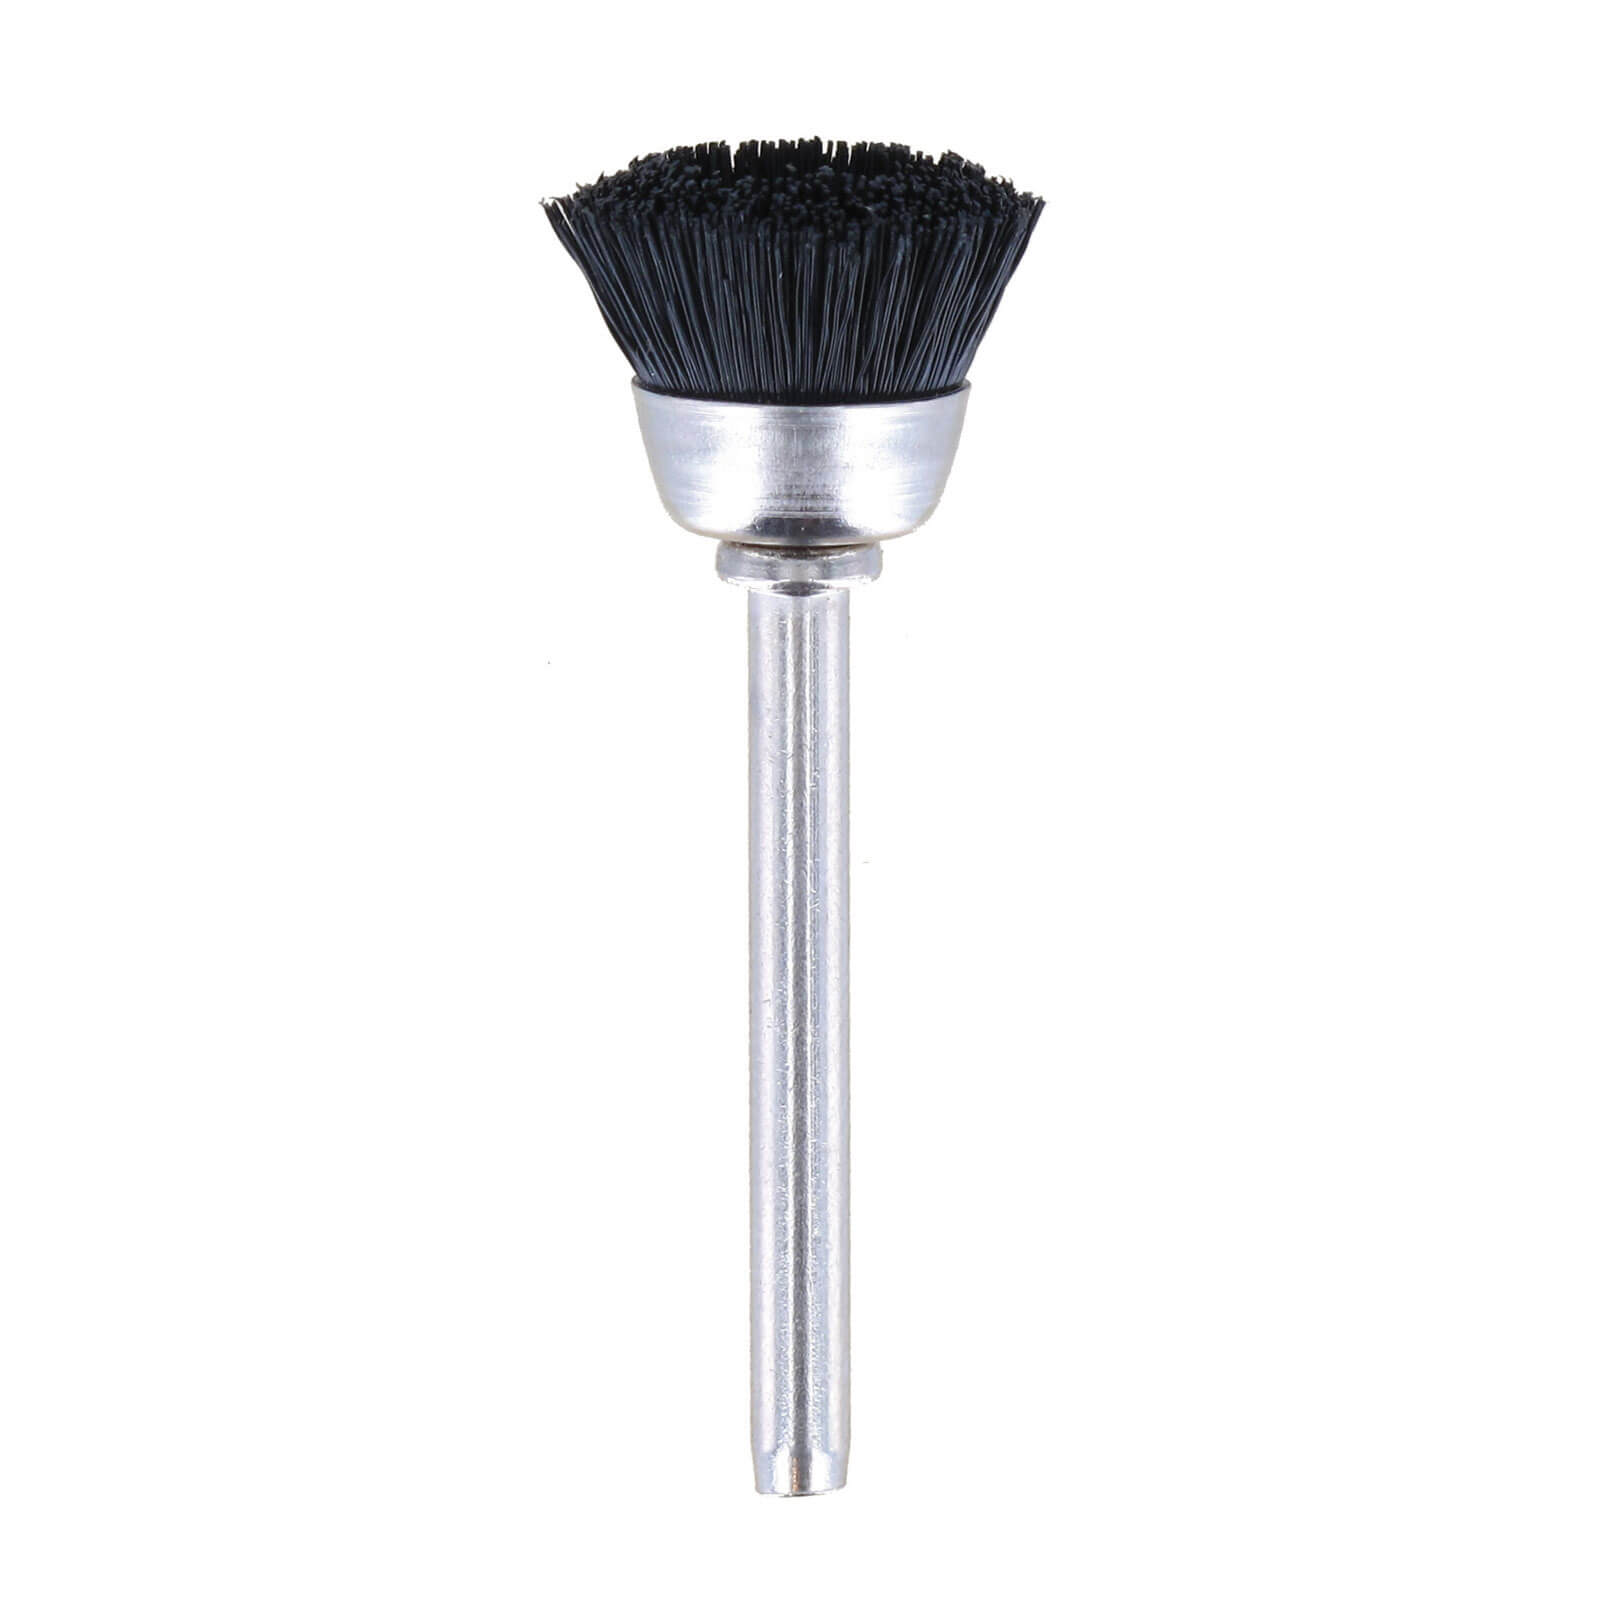 Image of Dremel 404 Bristle Cup Brush 13mm Pack of 2